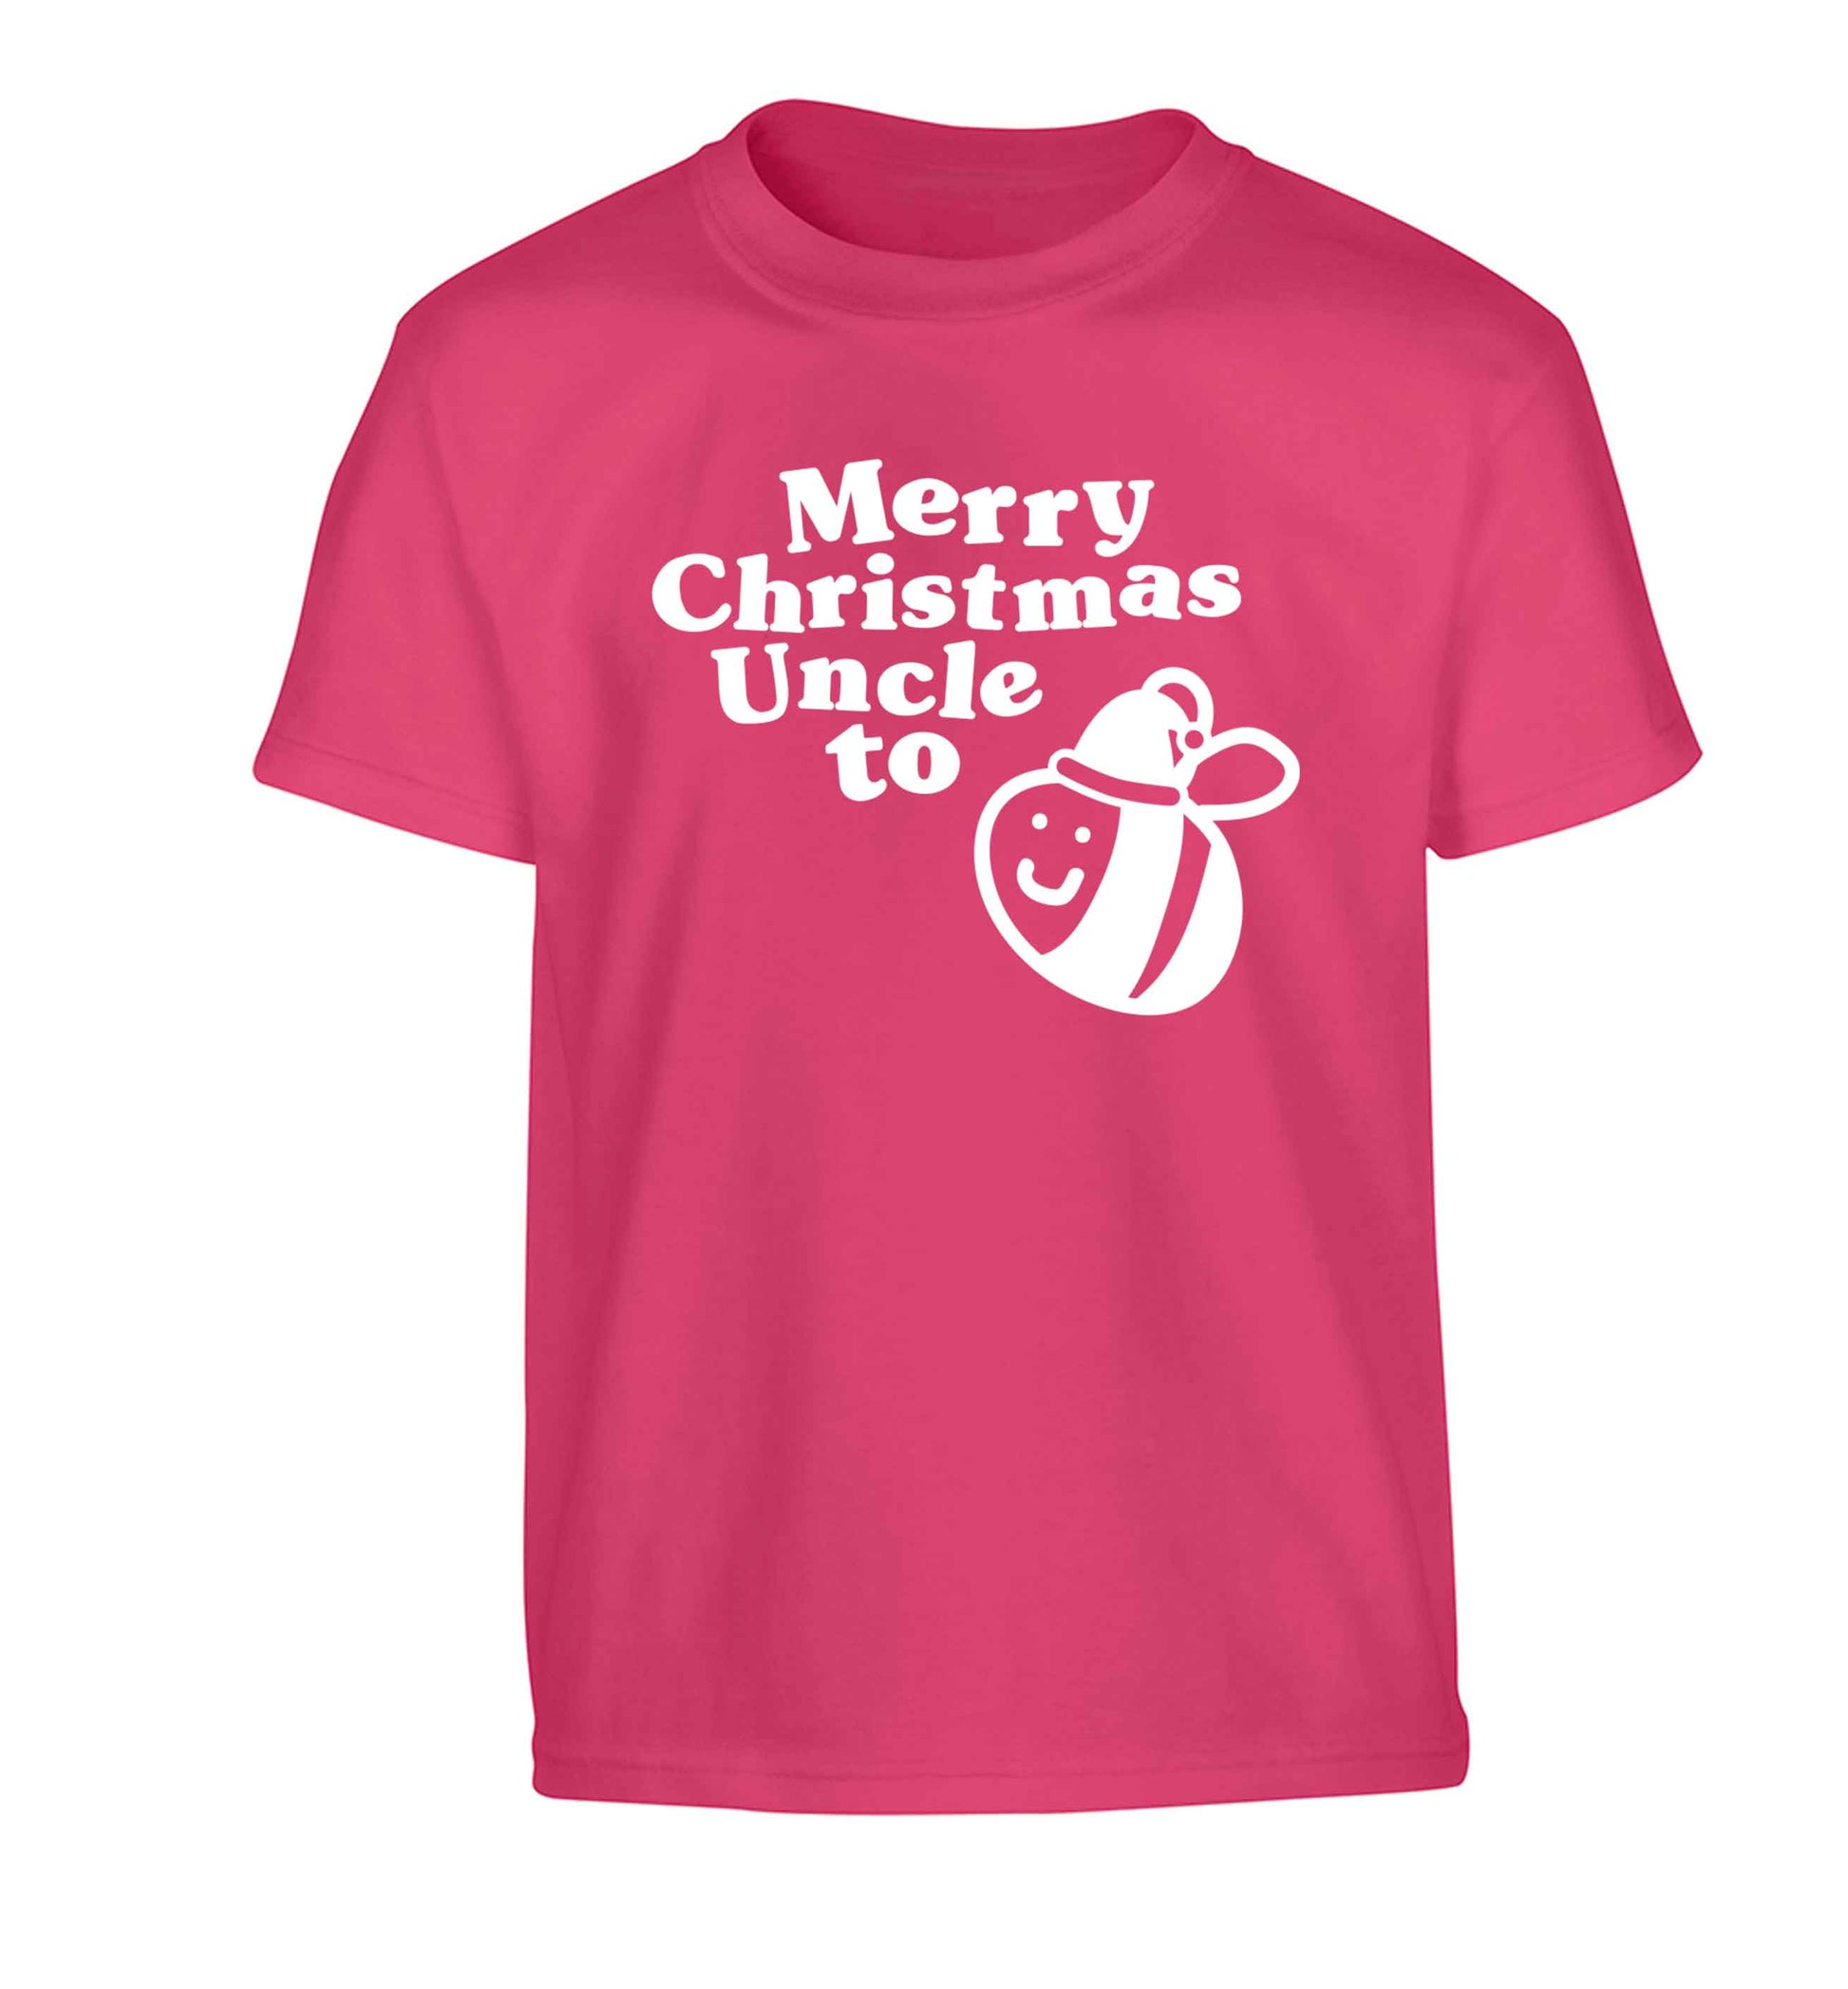 Merry Christmas uncle to be Children's pink Tshirt 12-13 Years